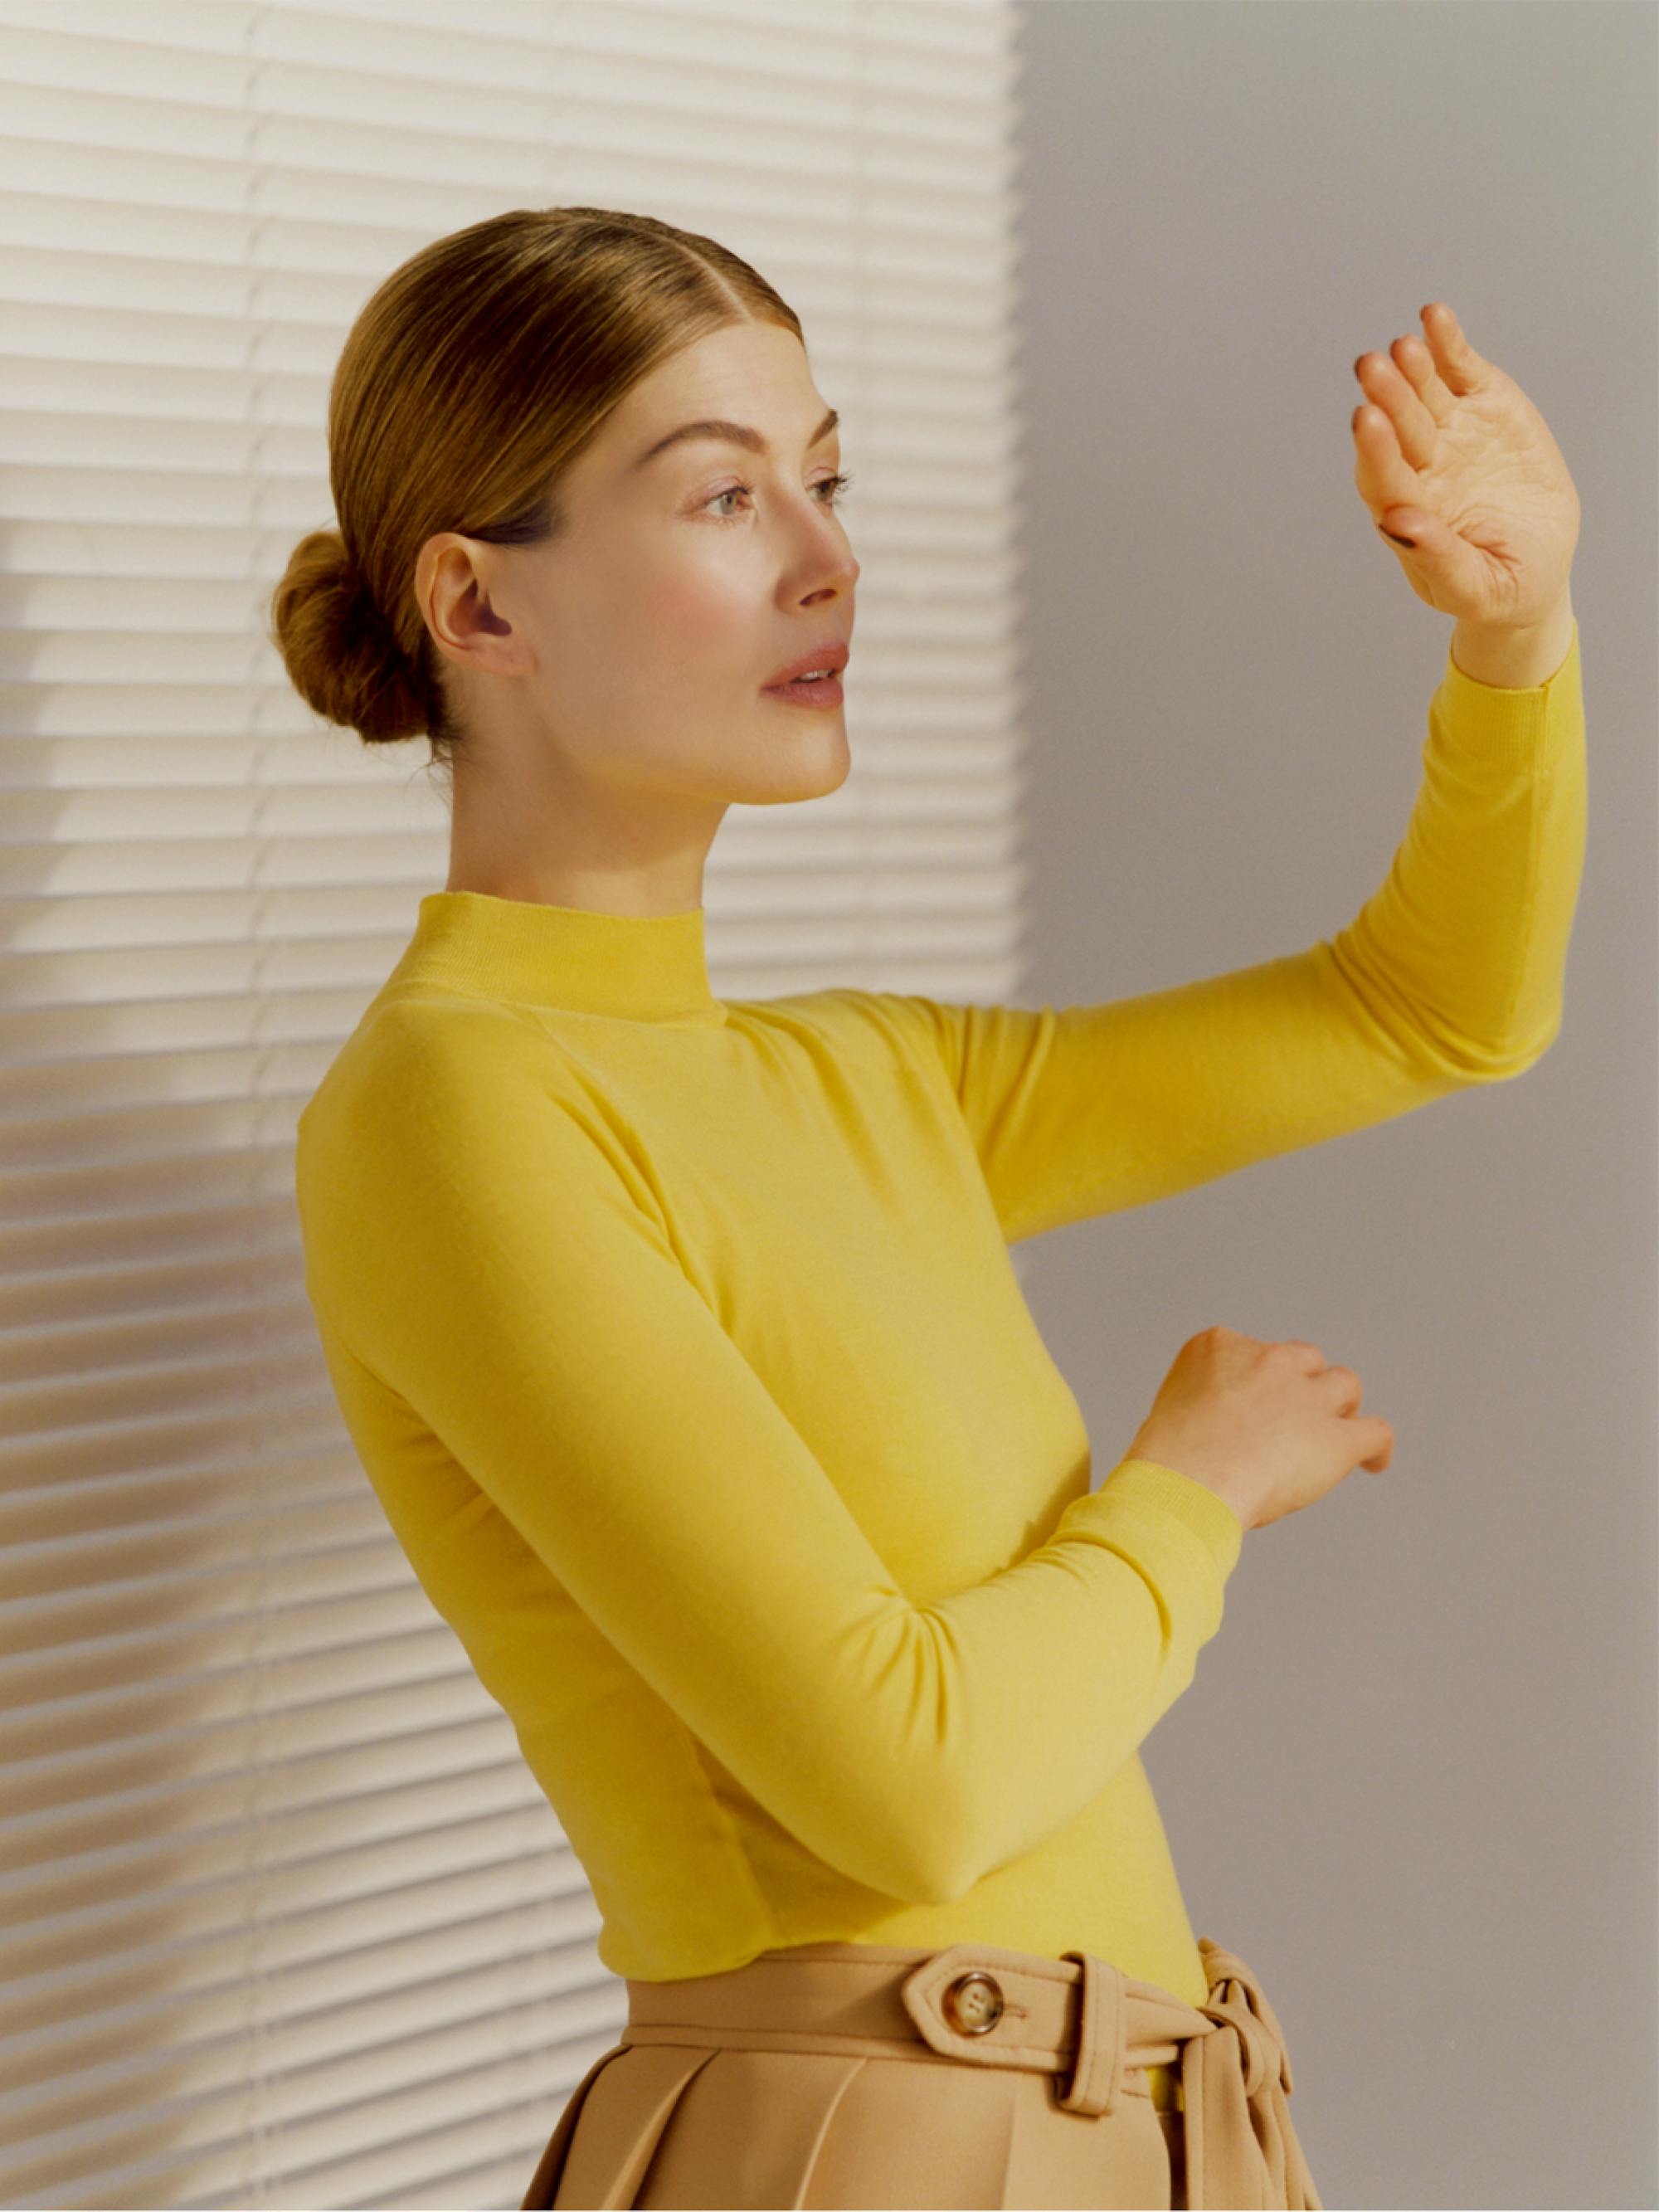 Rosamund Pike, posed in front of closed venetian blinds, wearing a bright yellow fitted turtleneck and beige trousers. She holds a hand up against the light pouring in from an unseen source in front of her.